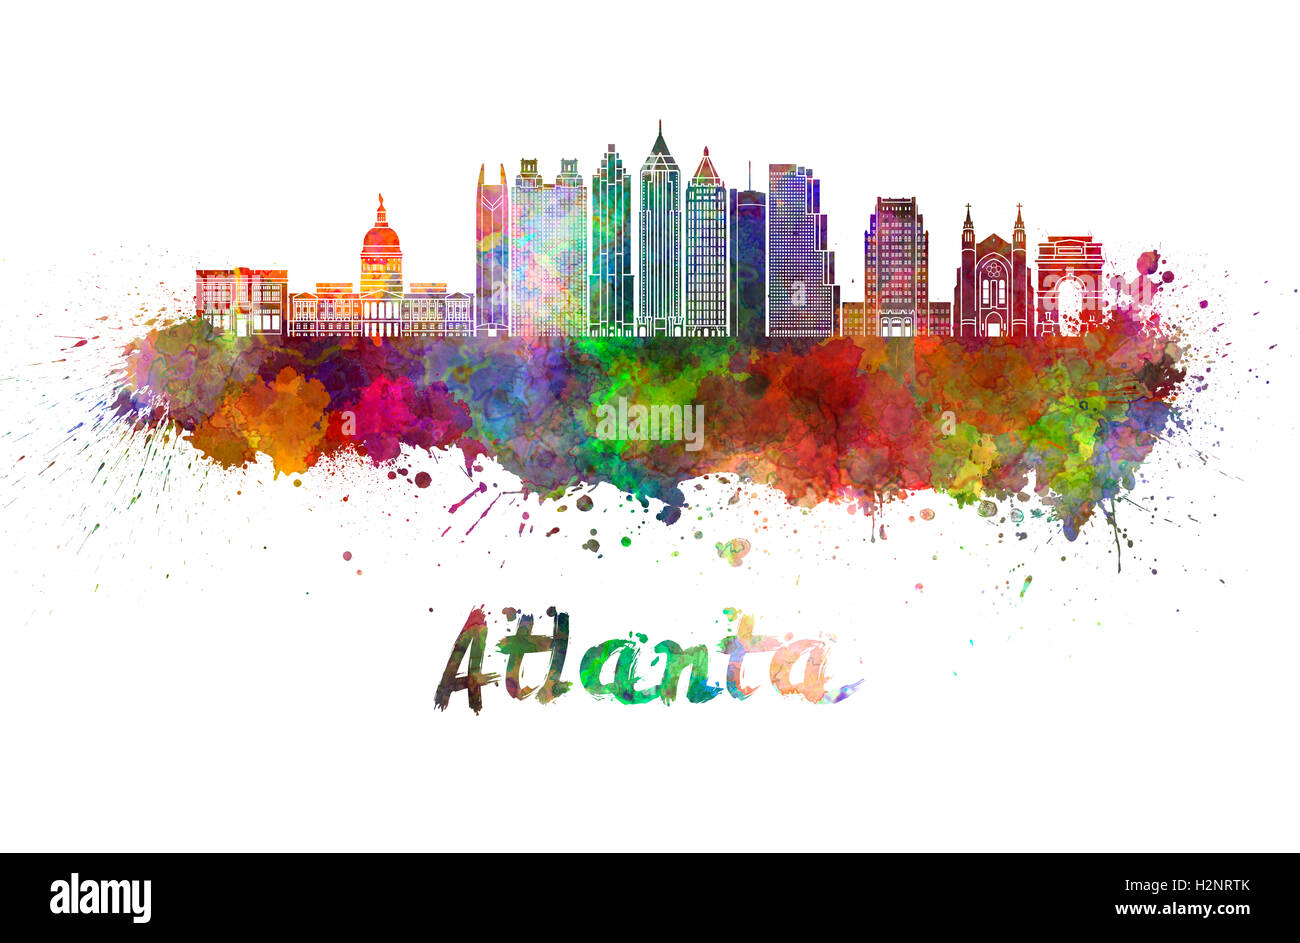 Atlanta  skyline in watercolor splatters with clipping path Stock Photo